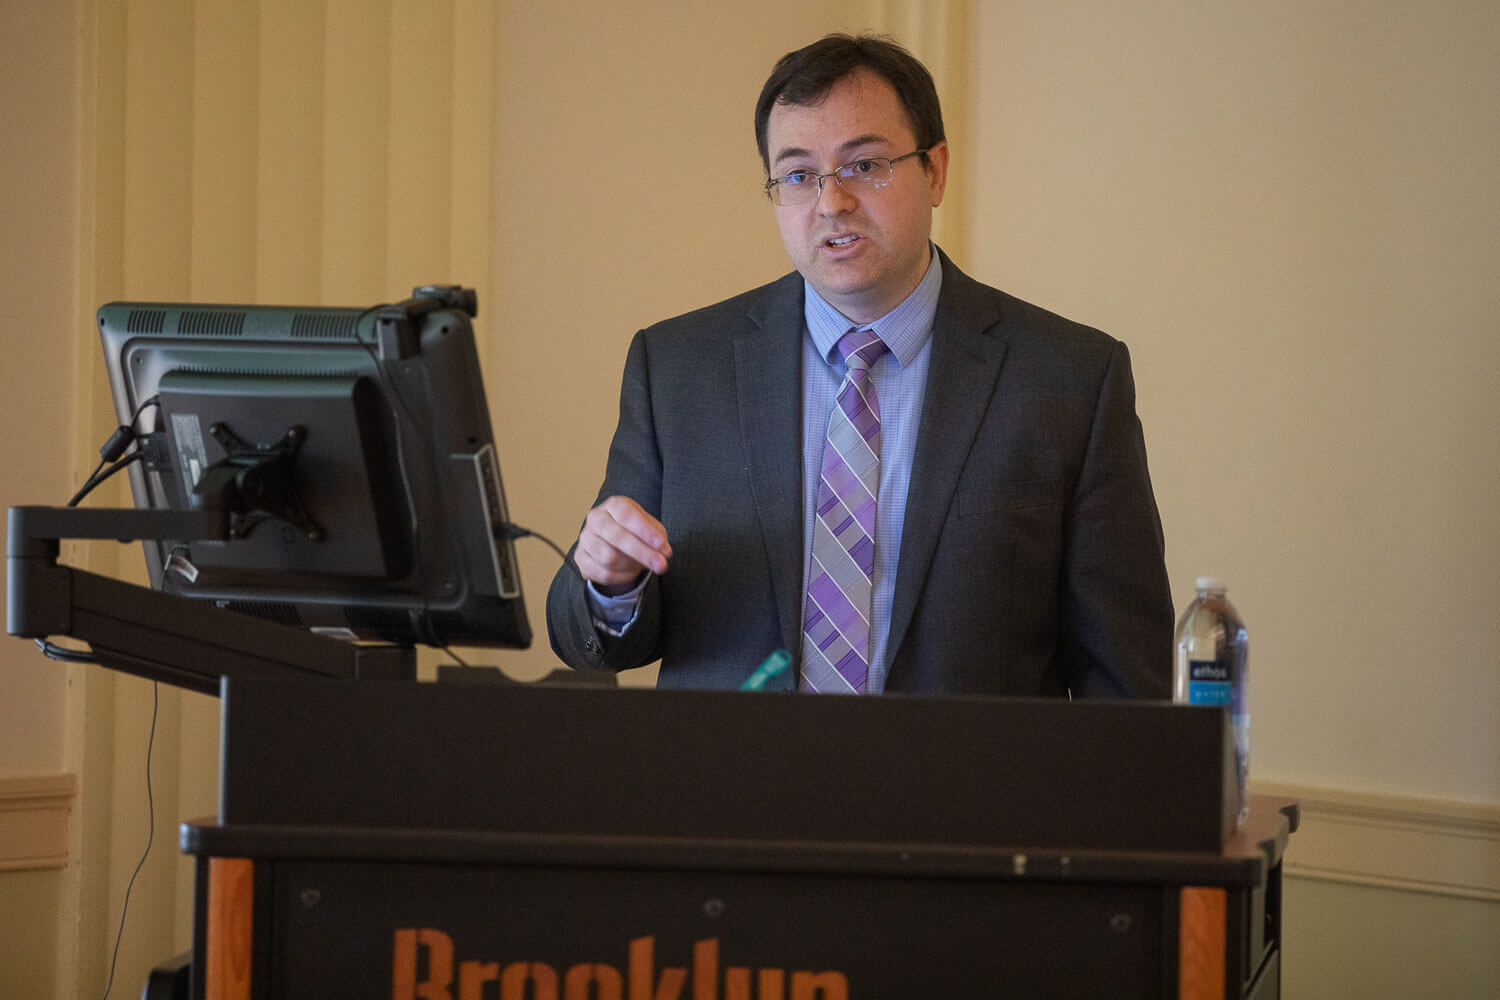 On March 11, oncologist and Chernobyl survivor Dr. Eugene Shenderov '05 returned to Brooklyn College to speak at the scientific and career seminar hosted by Brooklyn College Cancer Center (BCCC-CURE).